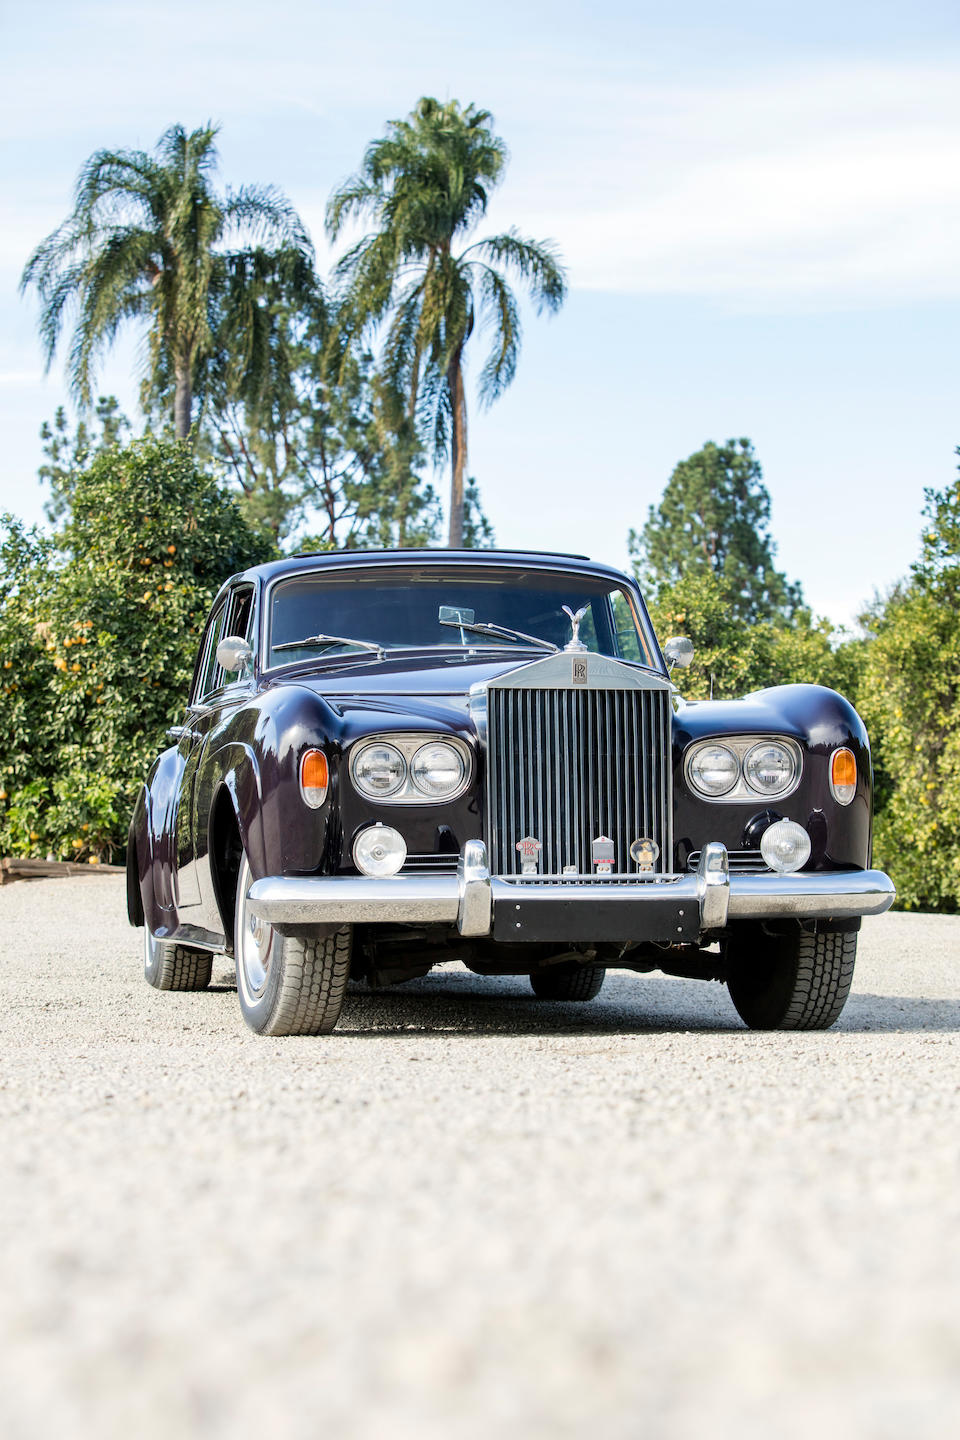 <b>1963 Rolls-Royce SILVER CLOUD III SALOON</b><br />Chassis no. SGT 61<br />Engine no. P 4950